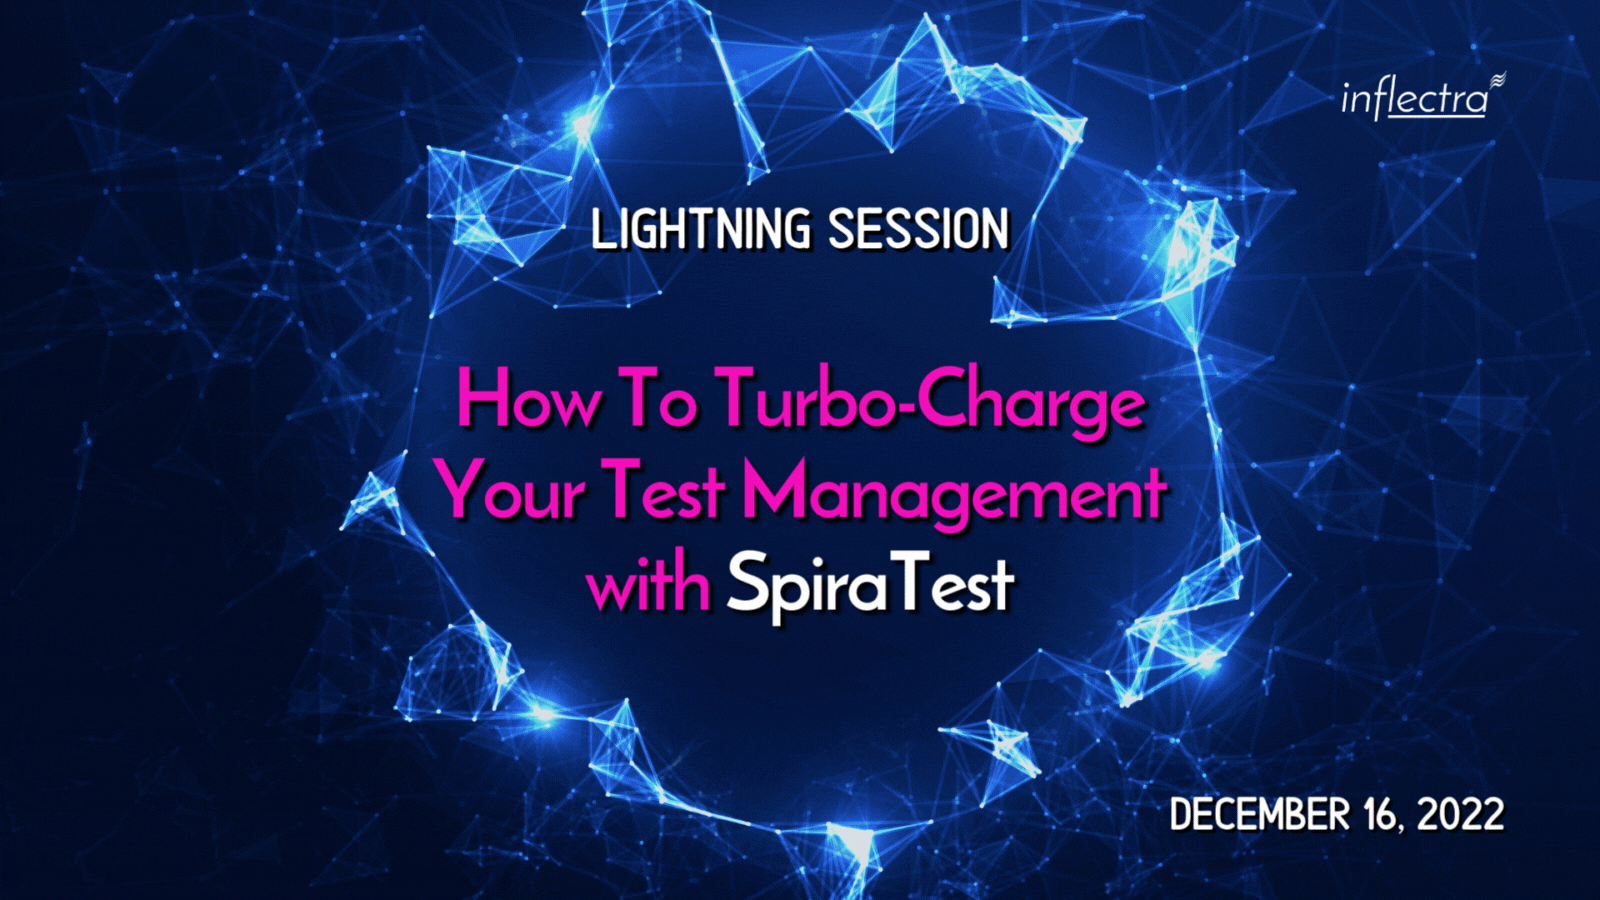 How To Turbo-Charge Your Test Management with SpiraTest-image